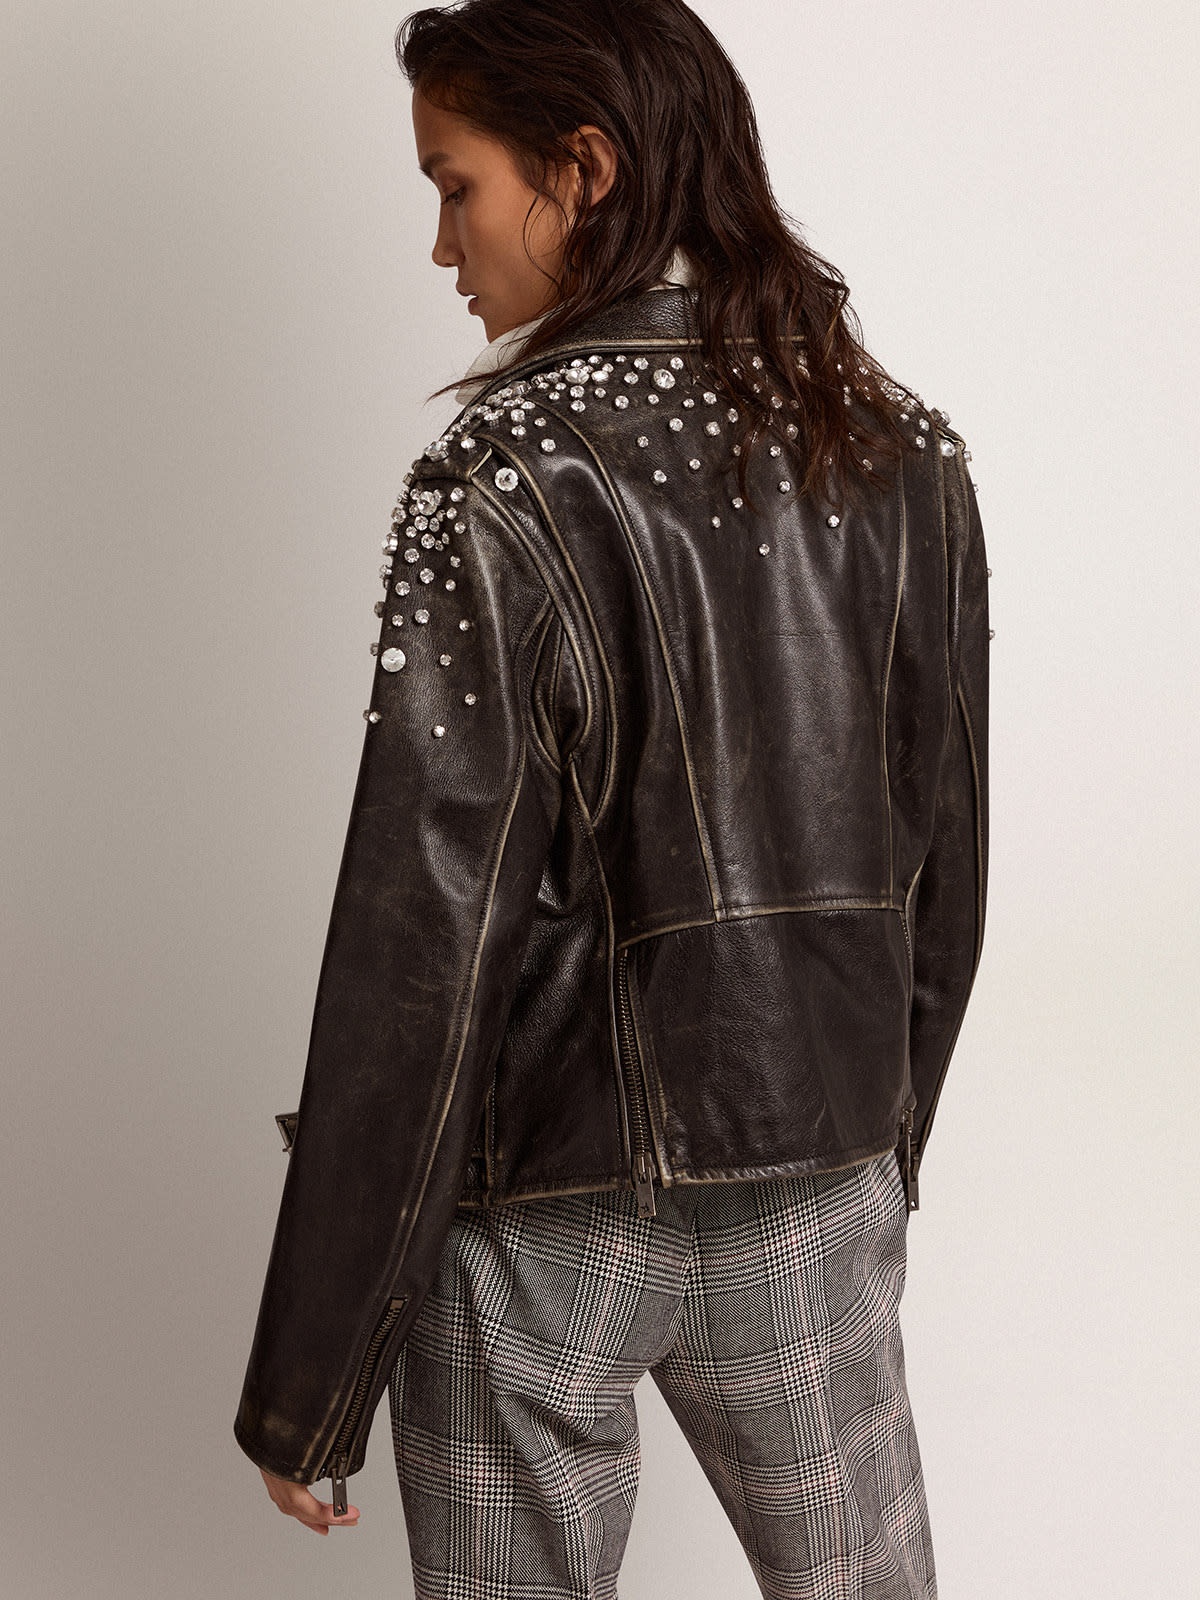 Women's biker jacket in distressed leather with cabochon crystals - 4